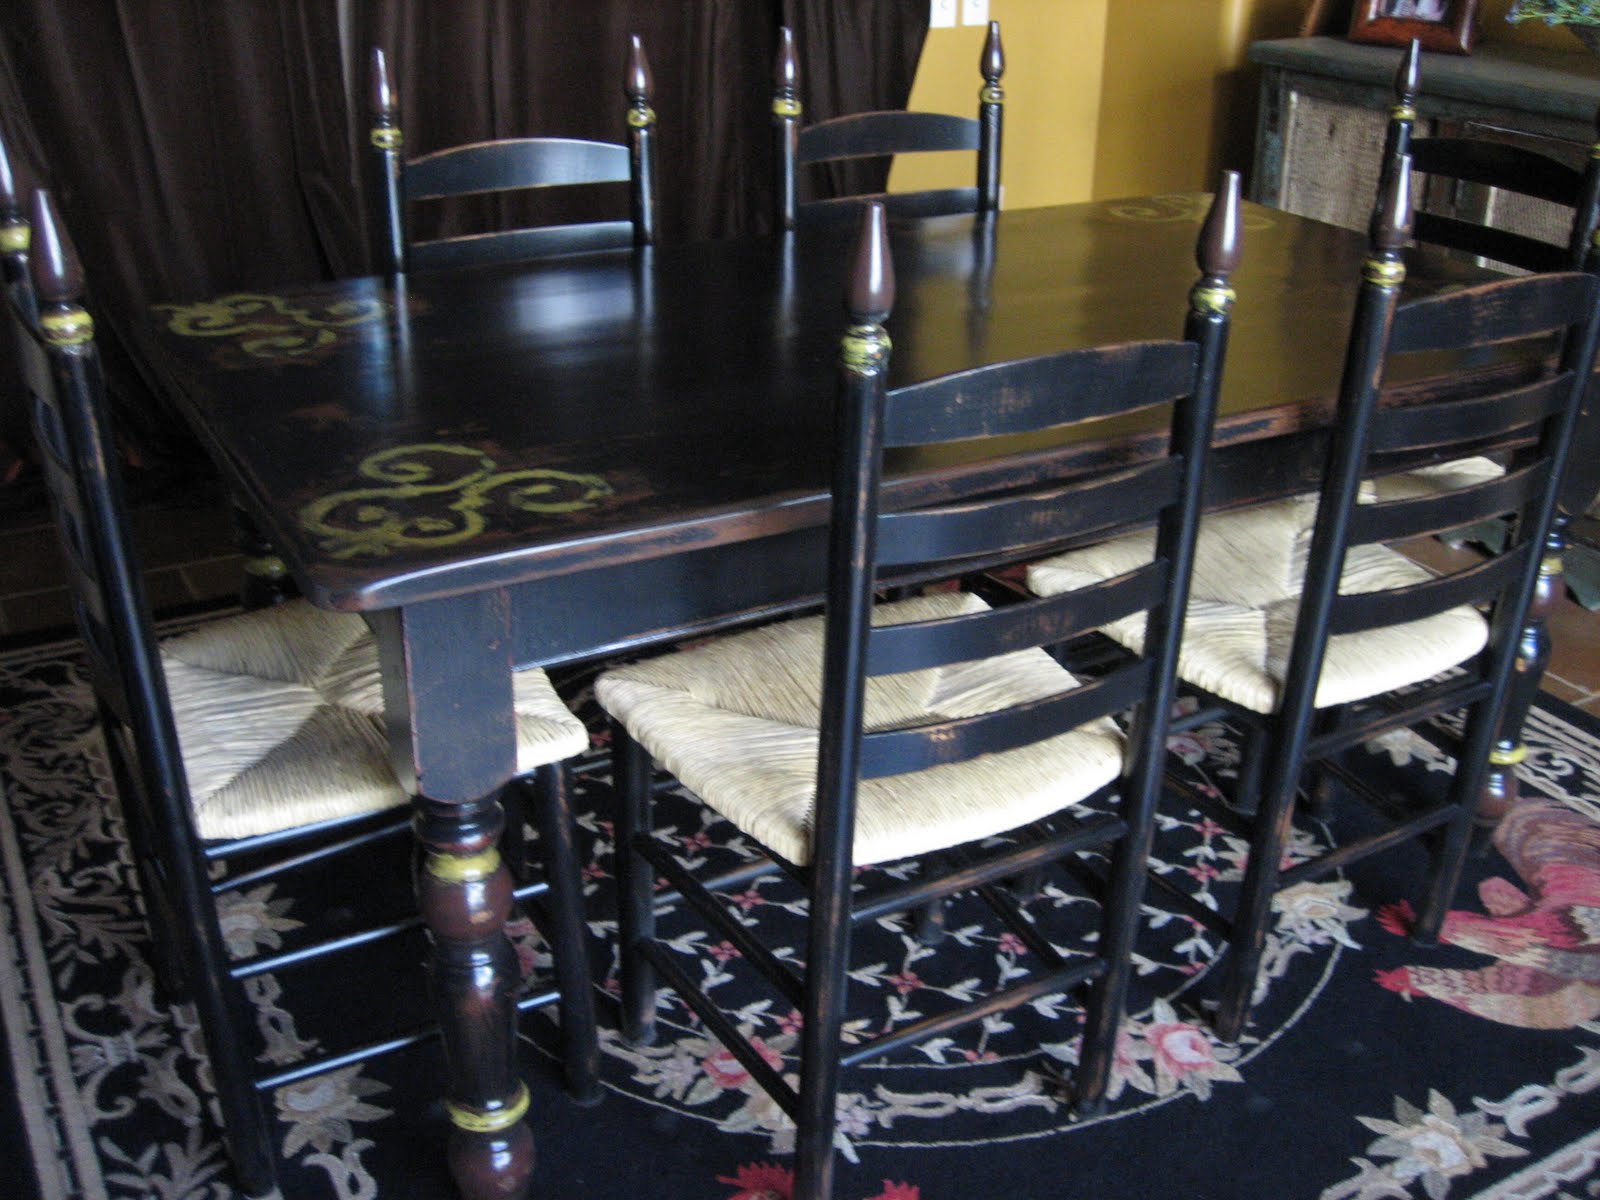 Black Dining Table